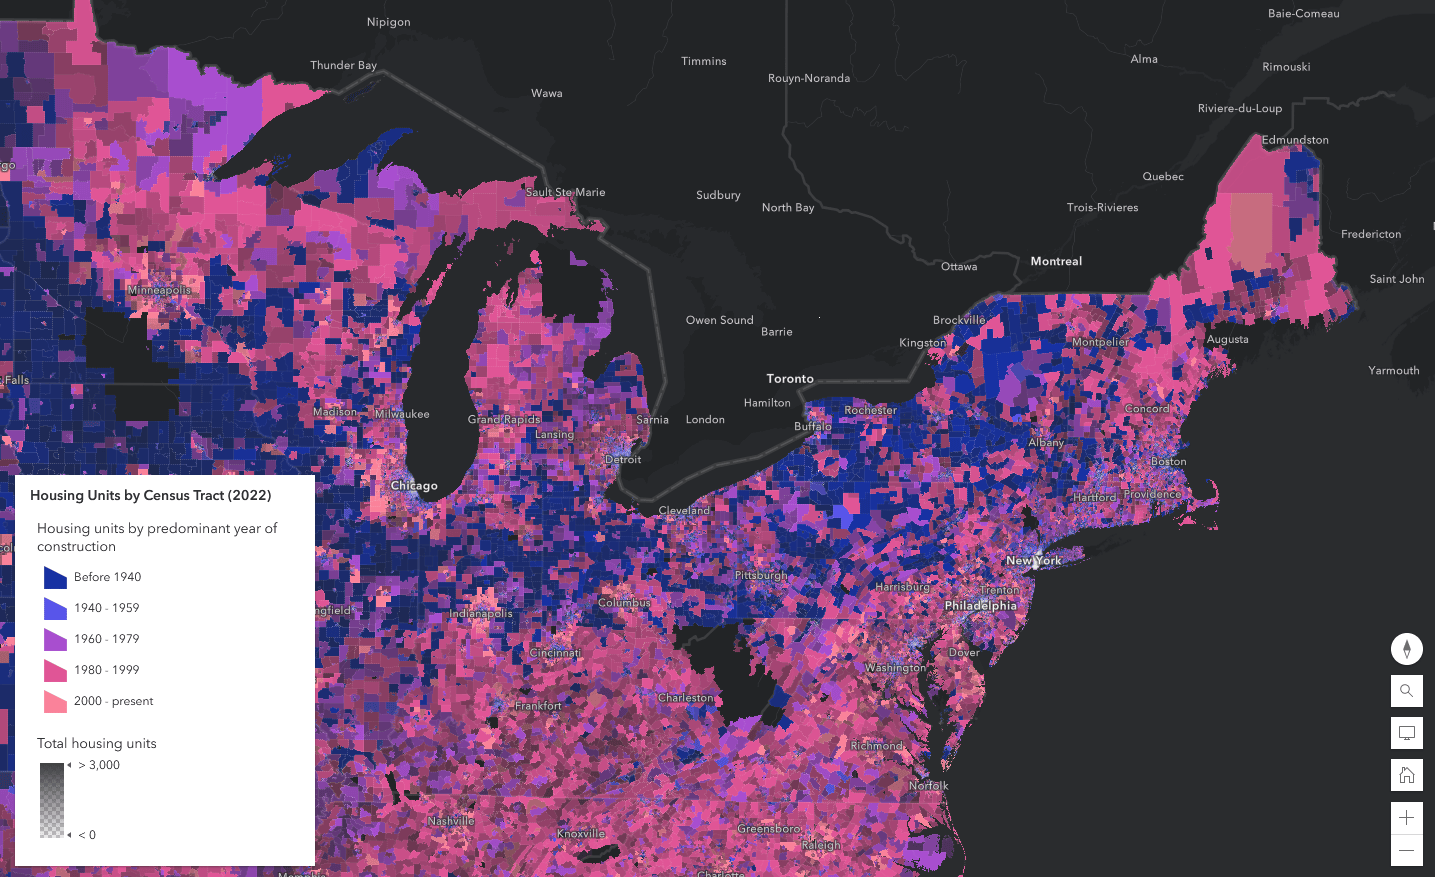 A choropleth map centered on the northeastern quadrant of the U.S., with counties colored to reflect the predominant era of local housing construction. Dark blue tracts indicate older housing stock, while bright pink tracts indicate newer housing stock.